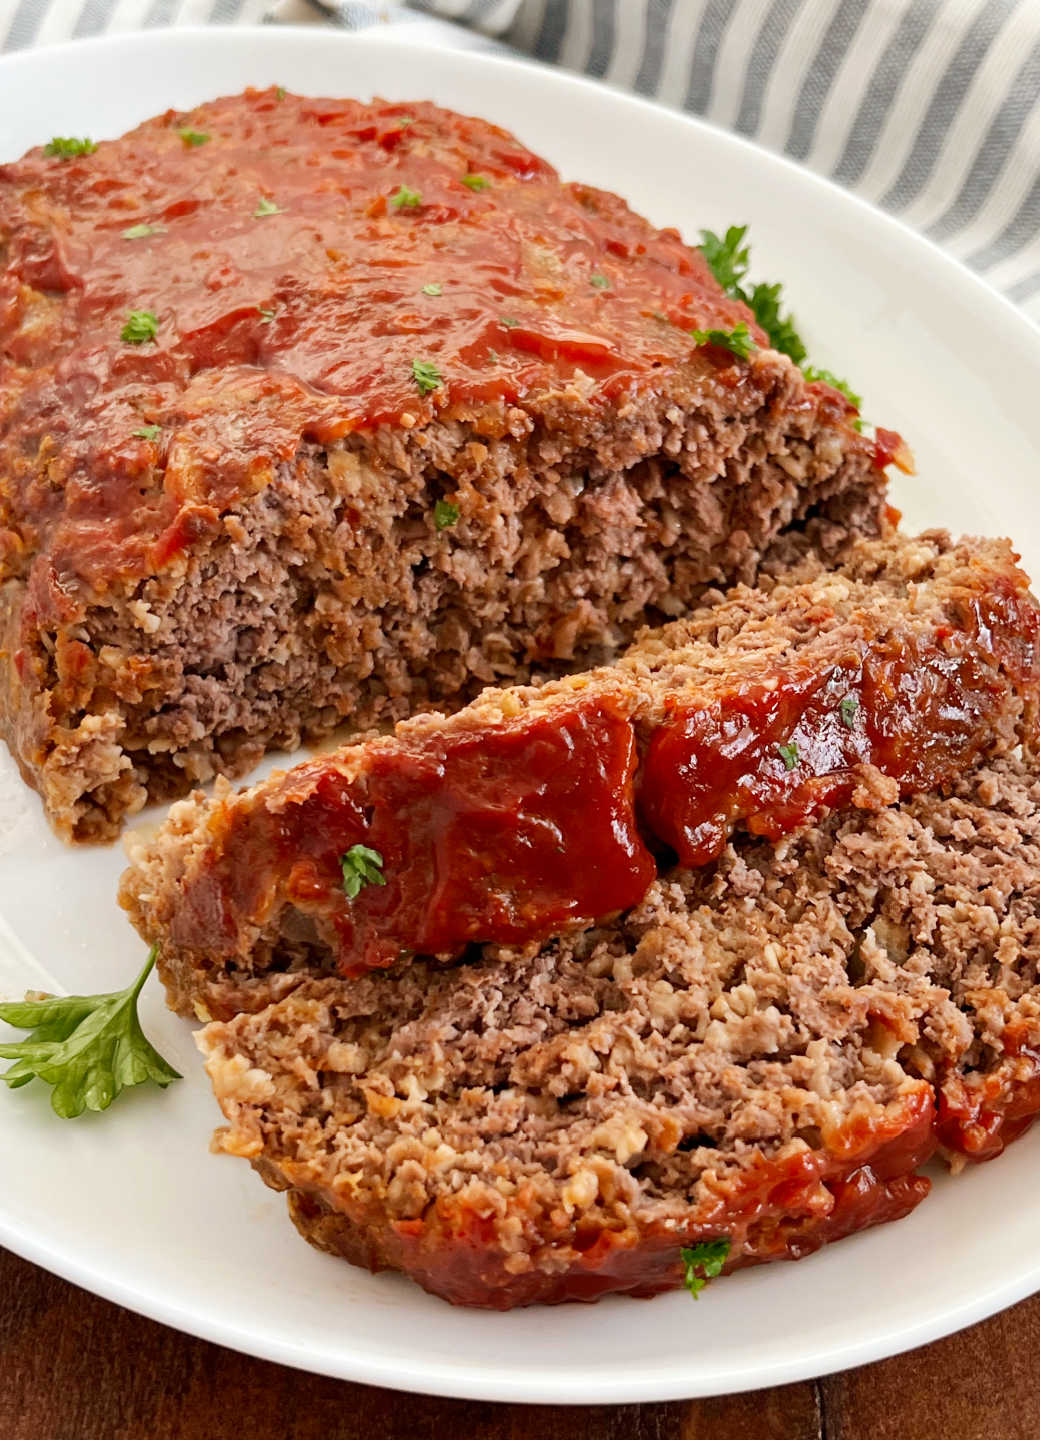 meatloaf with quaker oats and ketchup glaze sliced on a white platter.